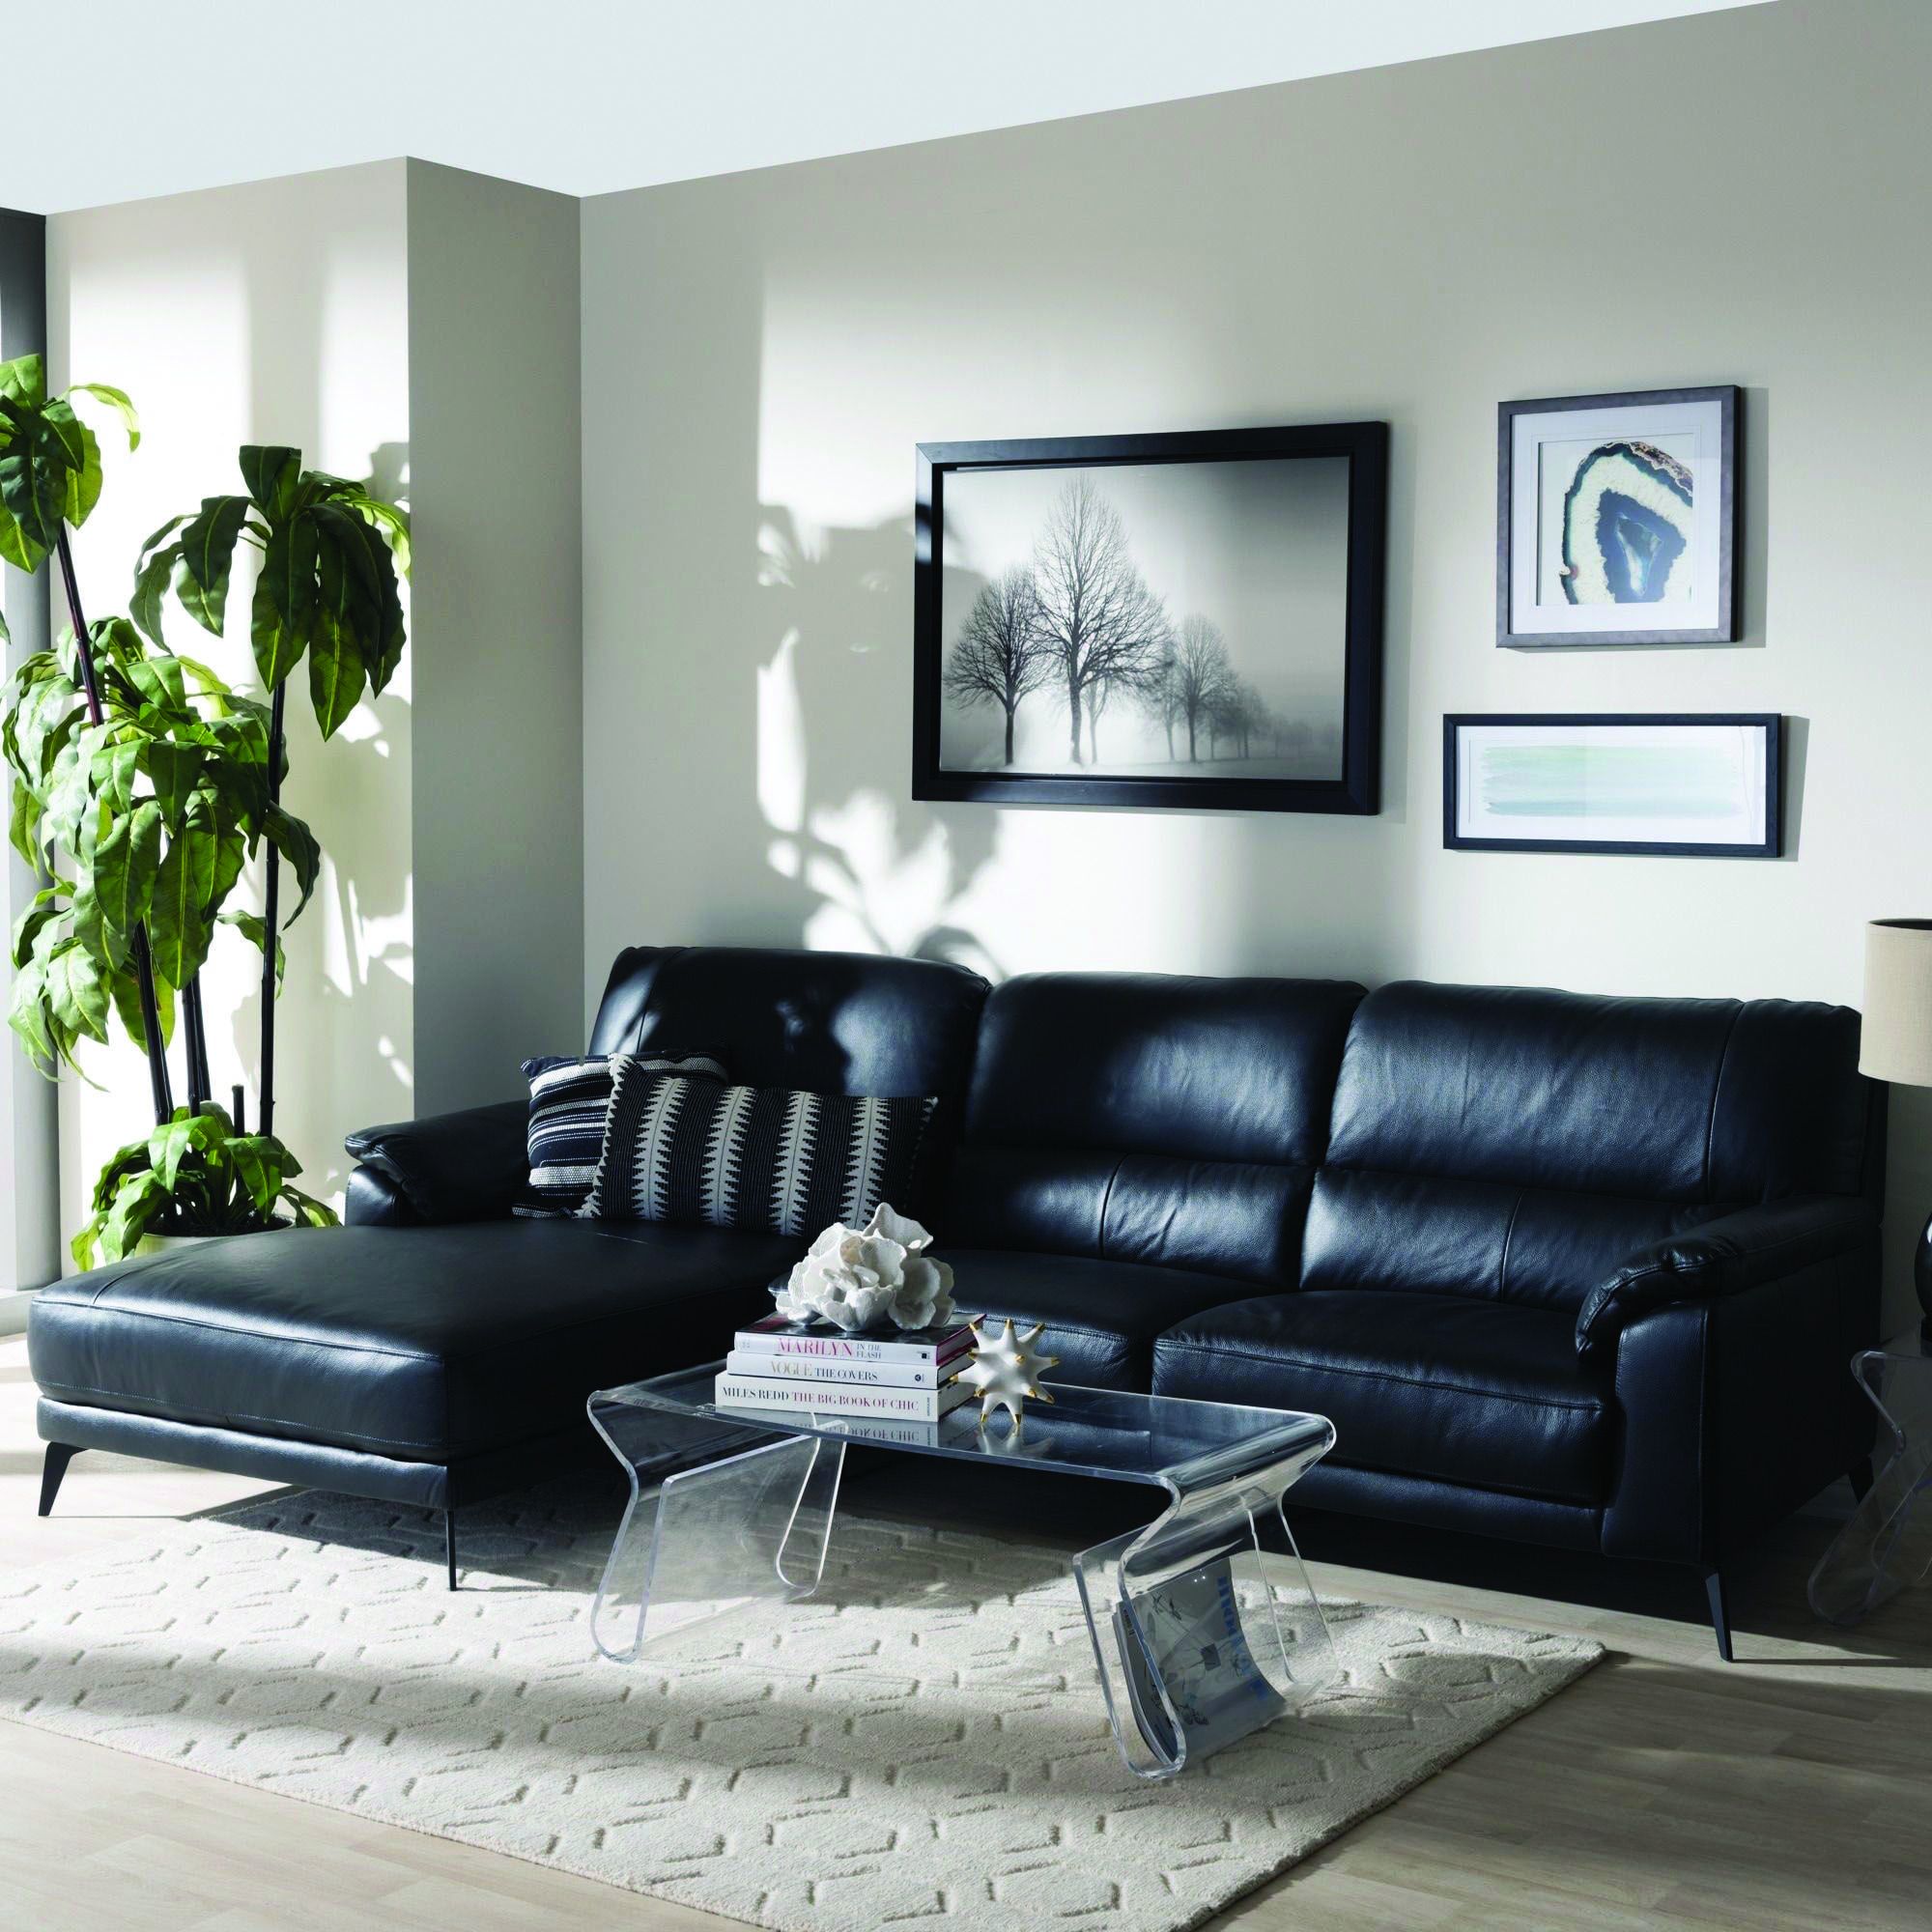 Cozy Black Living Room Goals For Your Home | Leather Couches Living In Sofas In Black (Gallery 19 of 20)